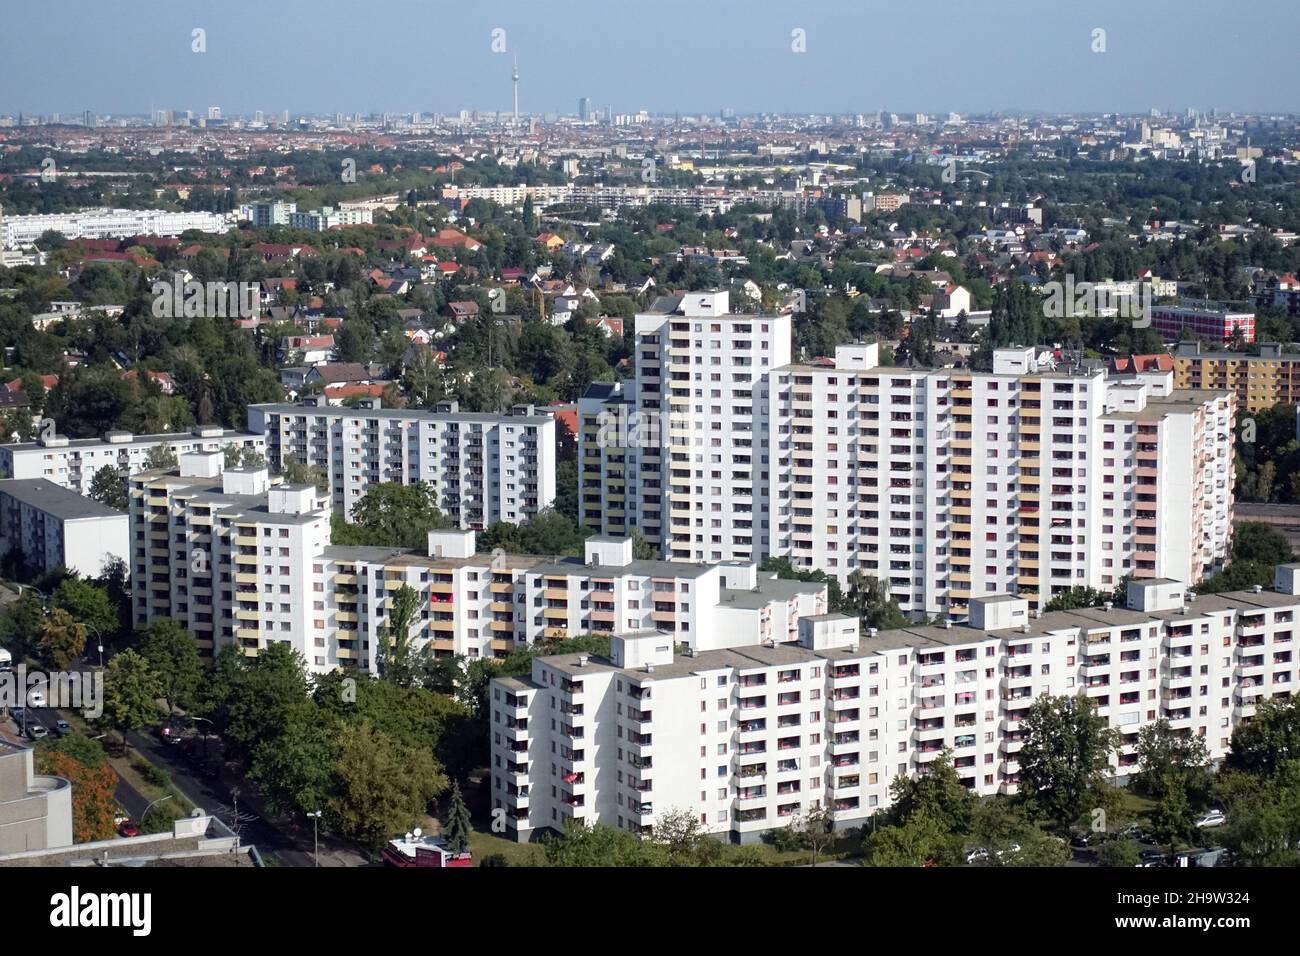 "12.08.2019, Germany, , Berlin - View of the high-rise buildings of Gropiusstadt.. 00S190812D015CAROEX.JPG [MODEL RELEASE: NO, PROPERTY RELEASE: NO (c Stock Photo